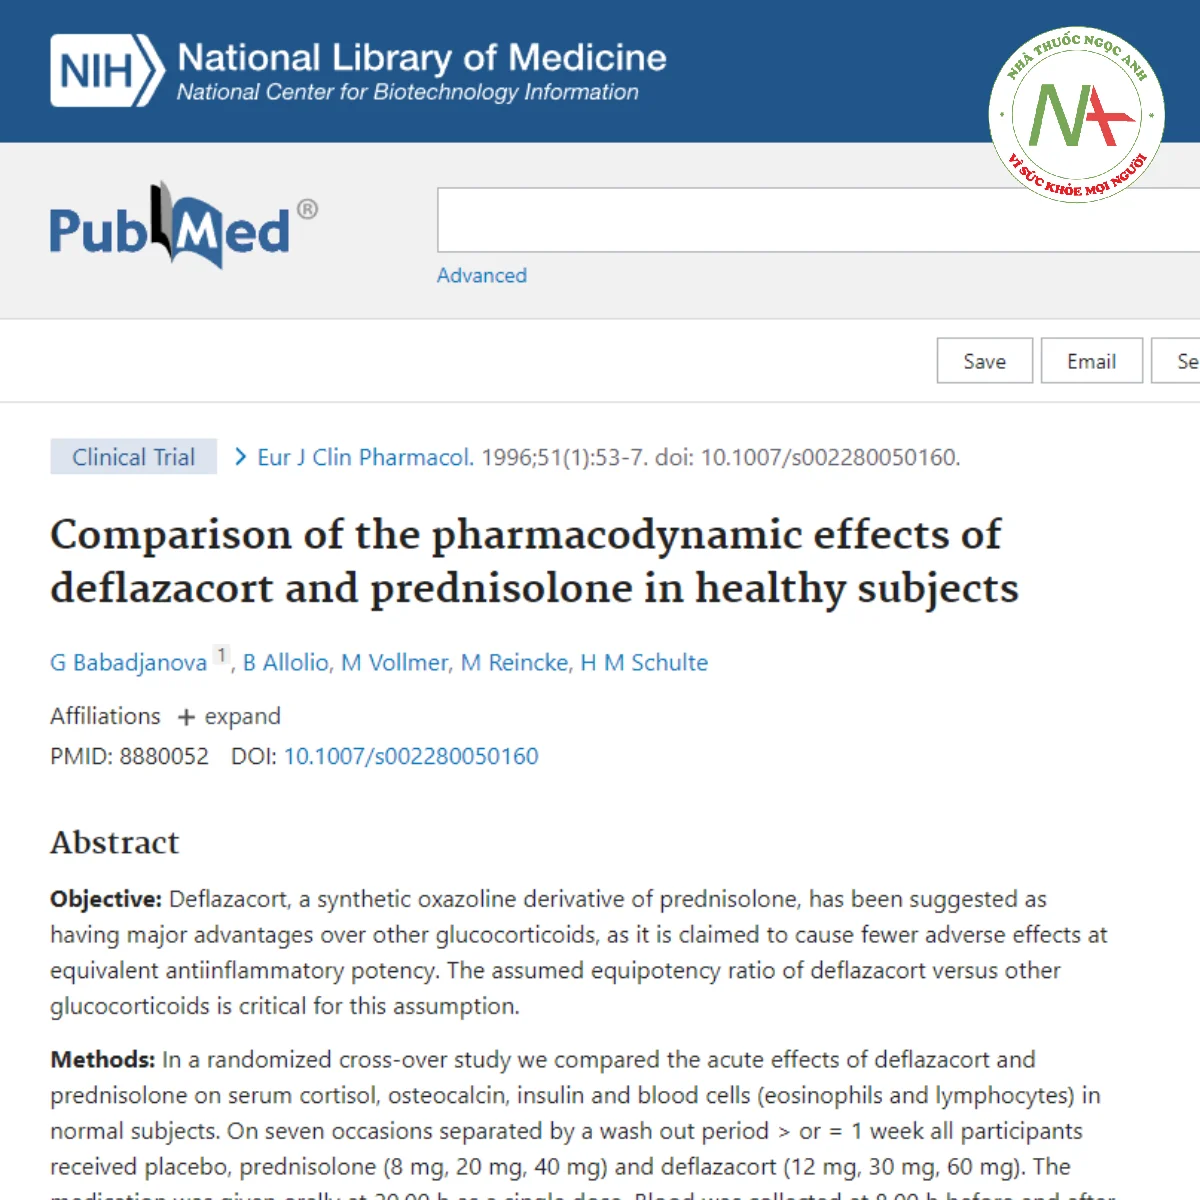 Comparison of the pharmacodynamic effects of deflazacort and prednisolone in healthy subjects